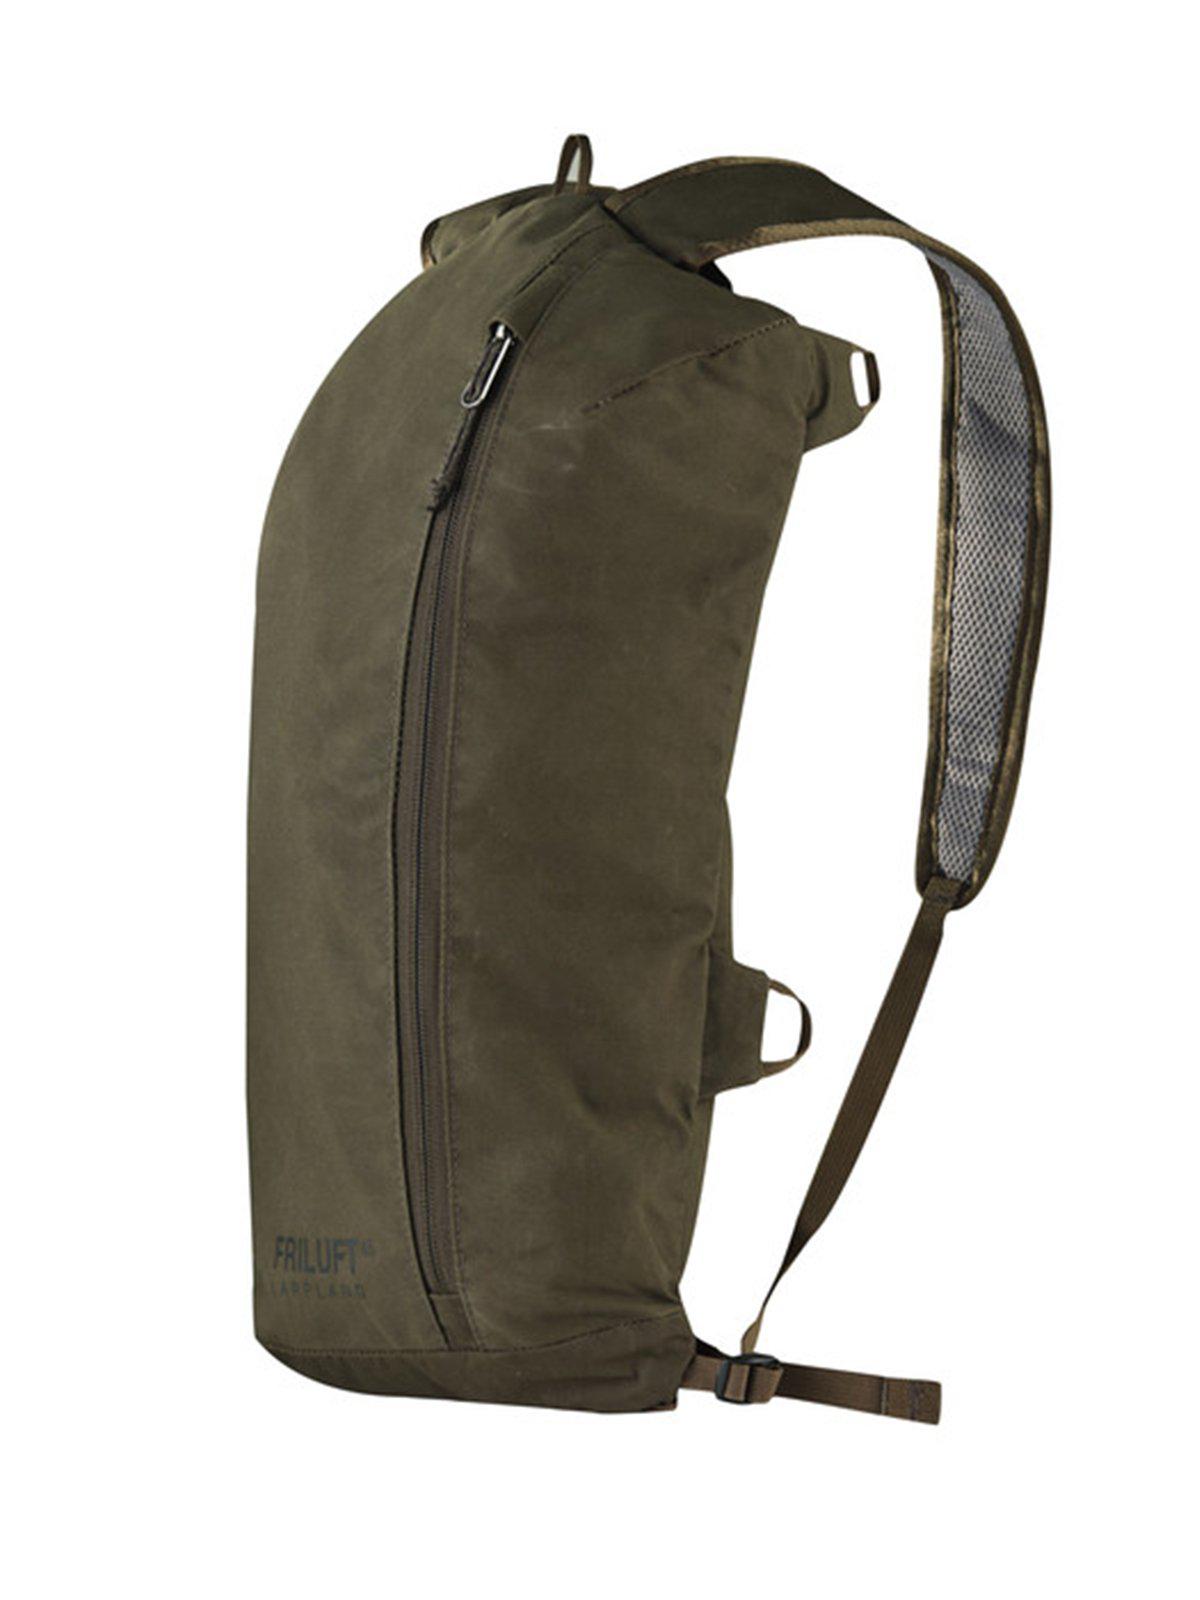 Fjallraven Lappland Friluft 45 Dark Olive Hunting Backpack - MORE by Morello Indonesia